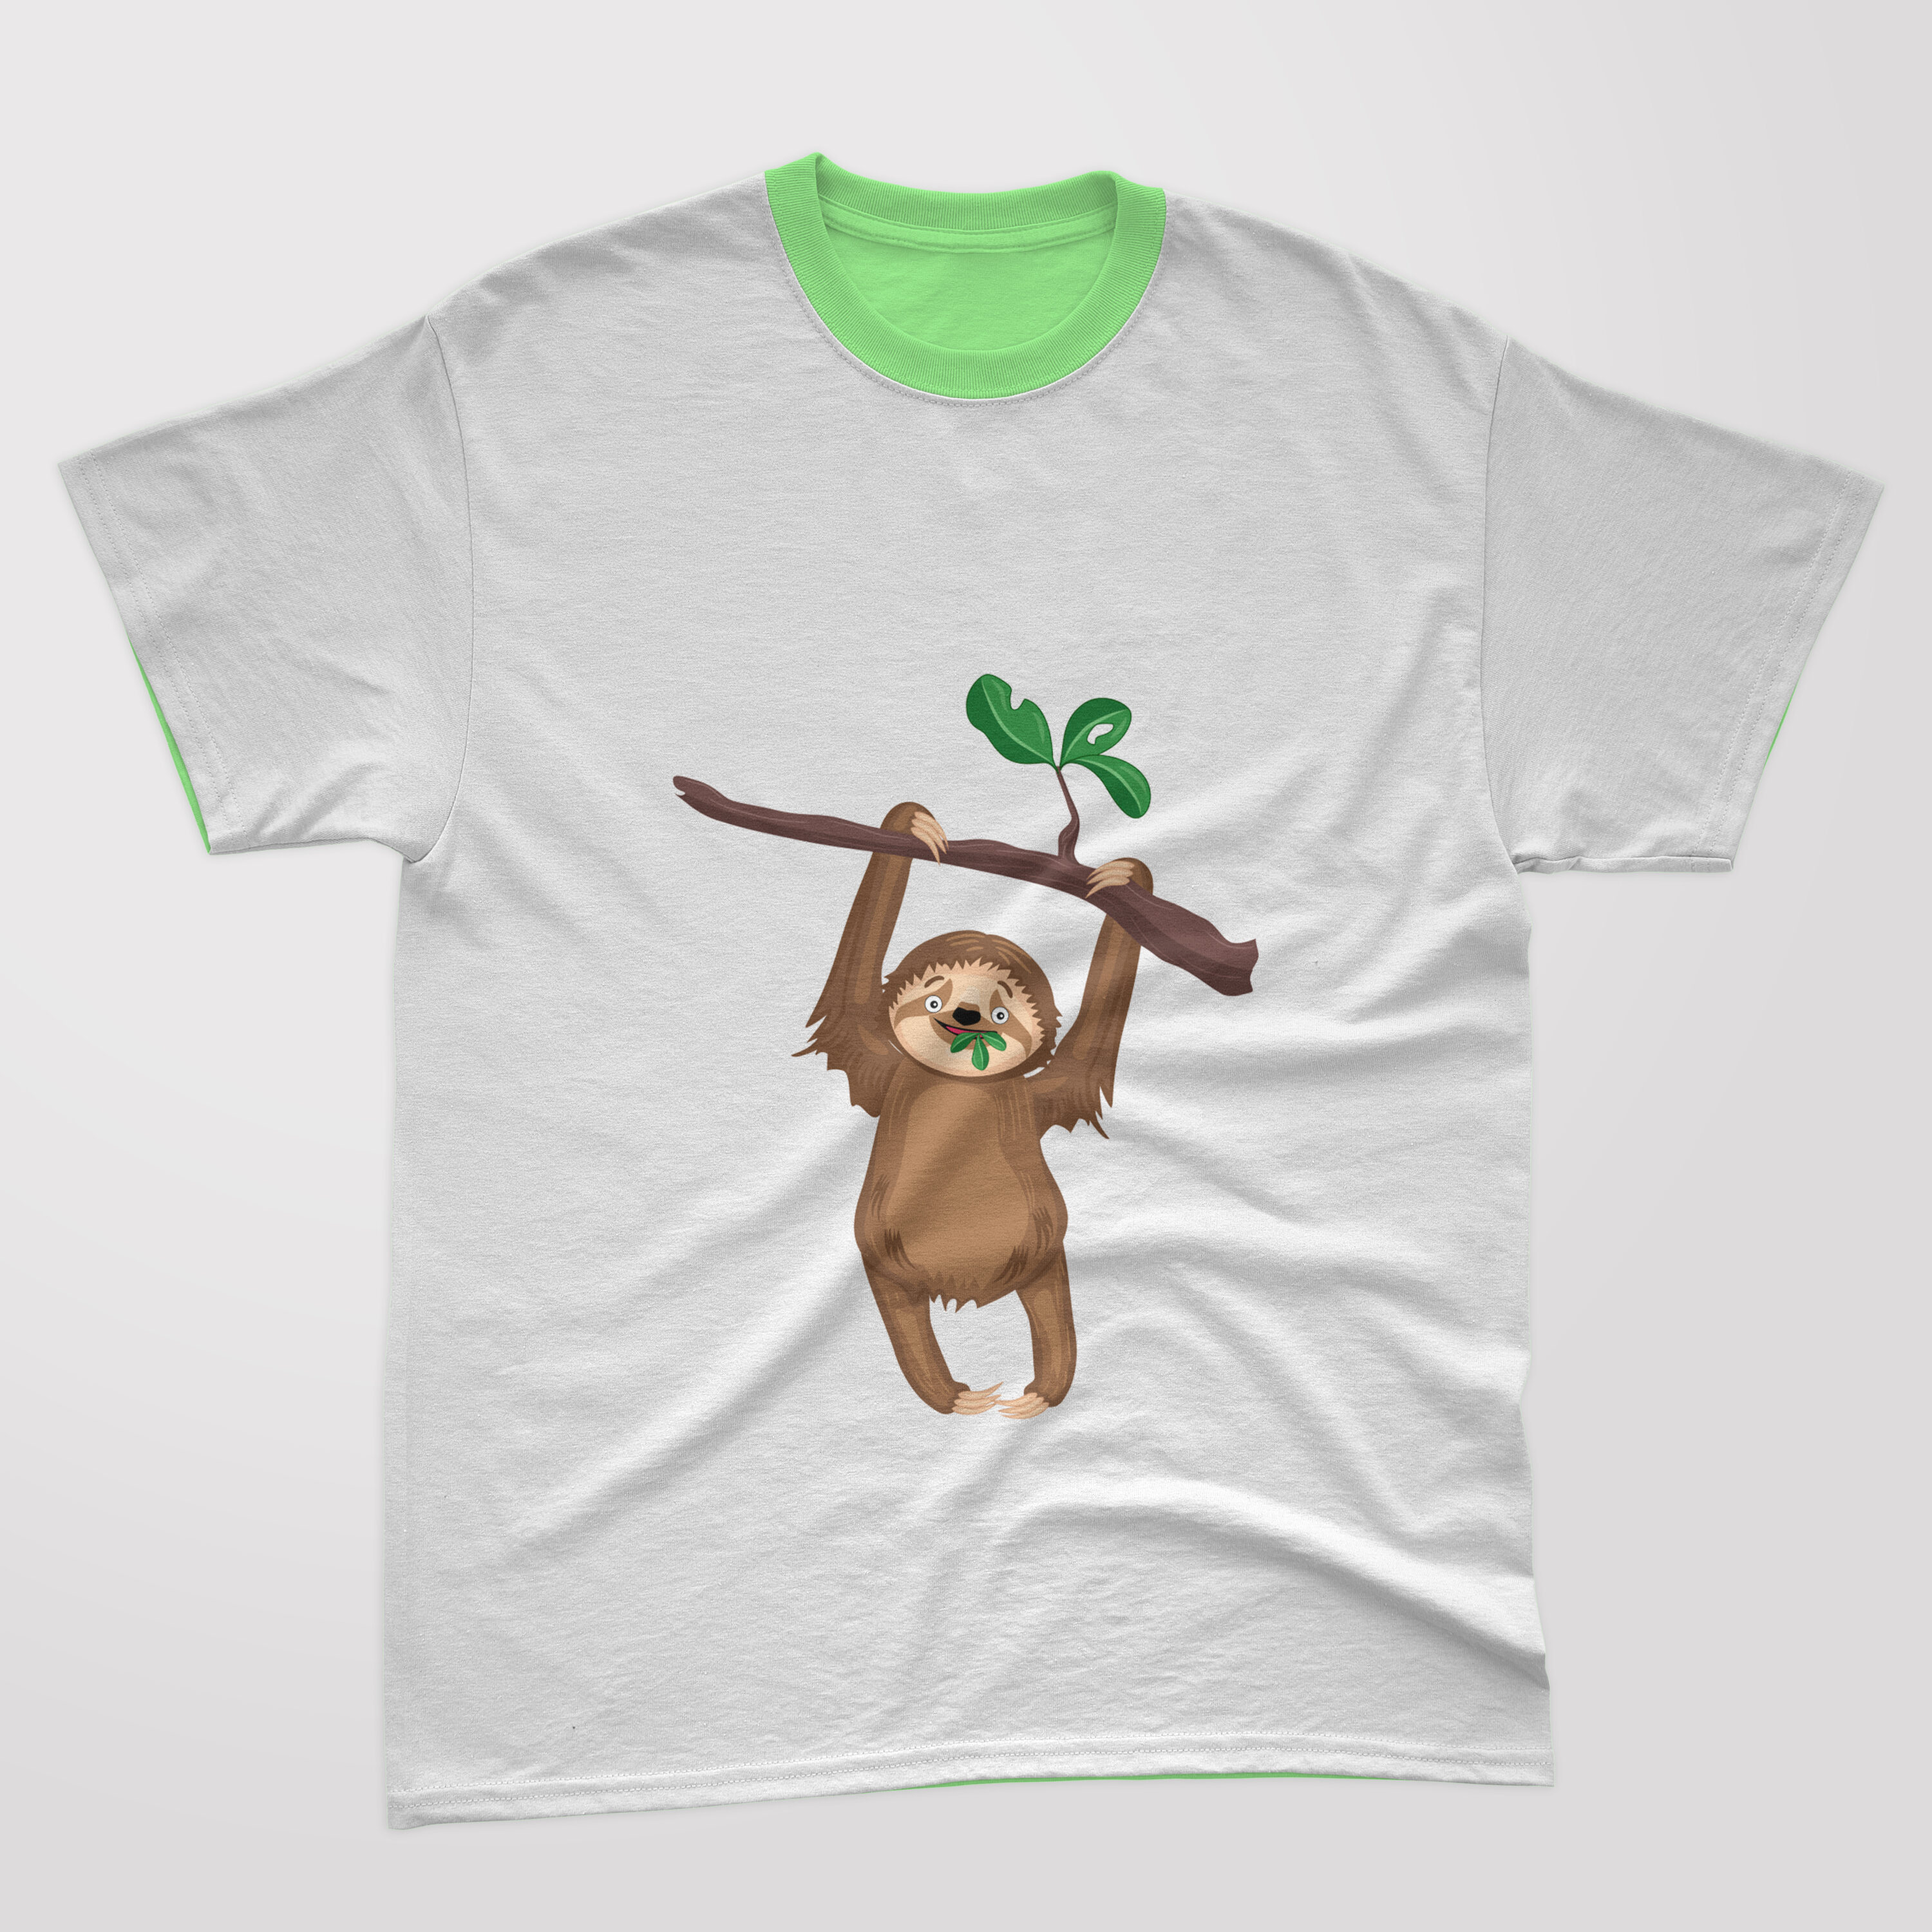 Image of a t-shirt with a beautiful sloth print on a tree.